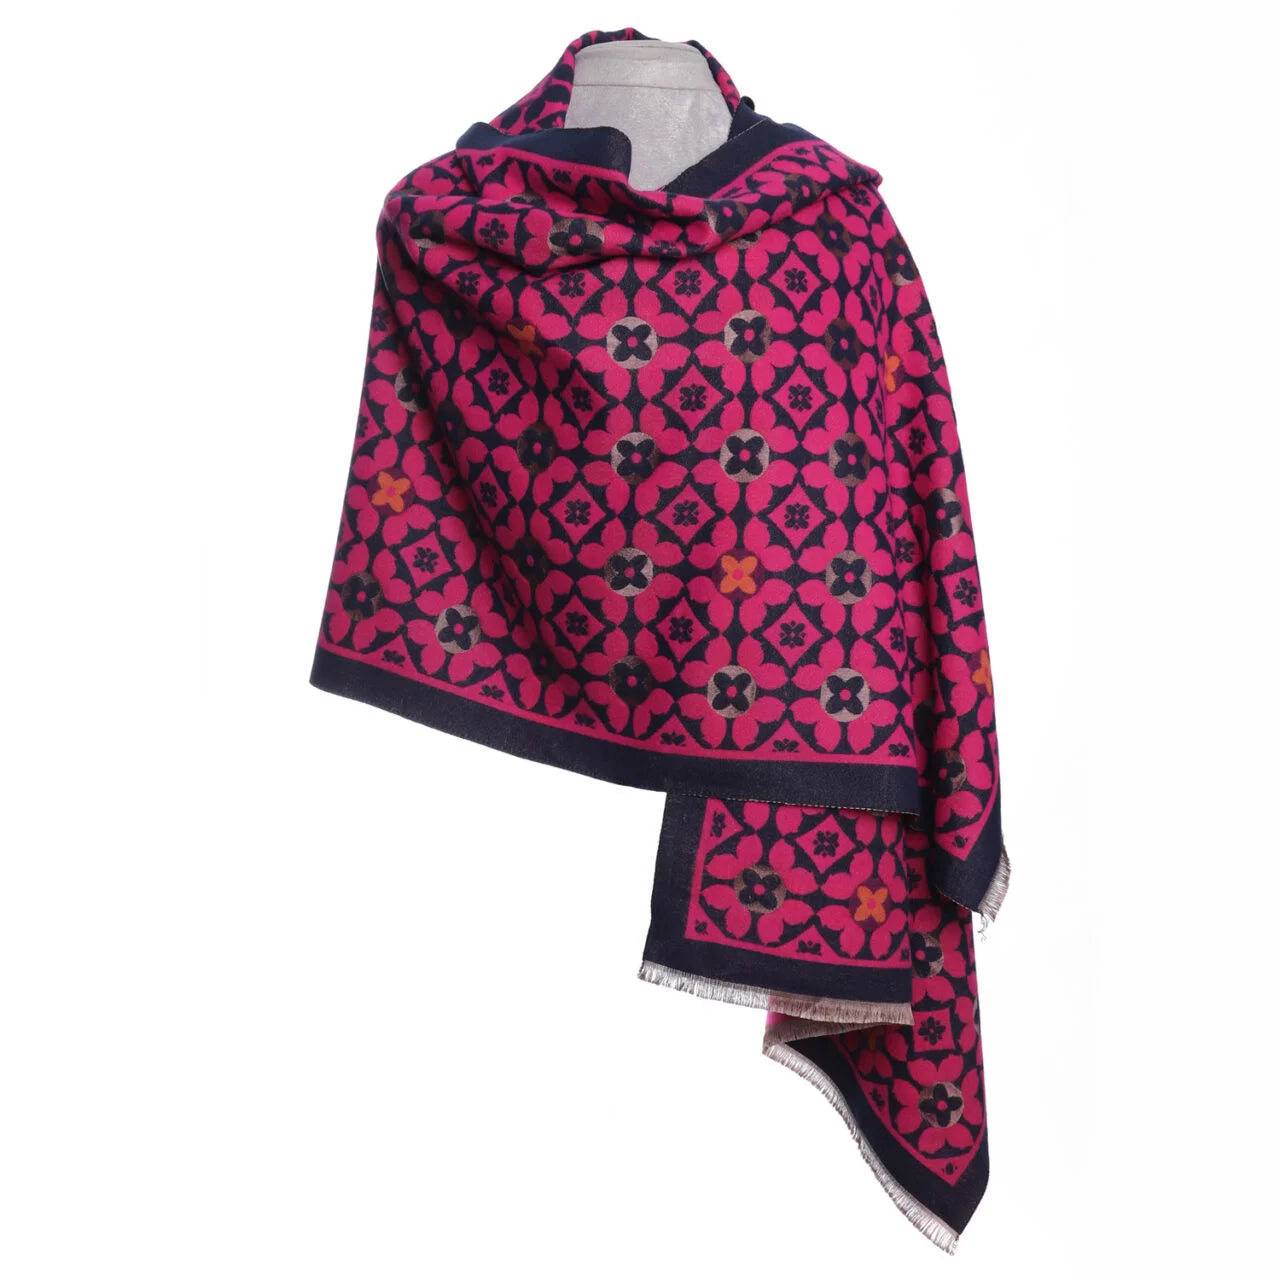 Fab Gifts | Winter Accessories Wrap Reversible Hot Pink by Weirs of Baggot Street